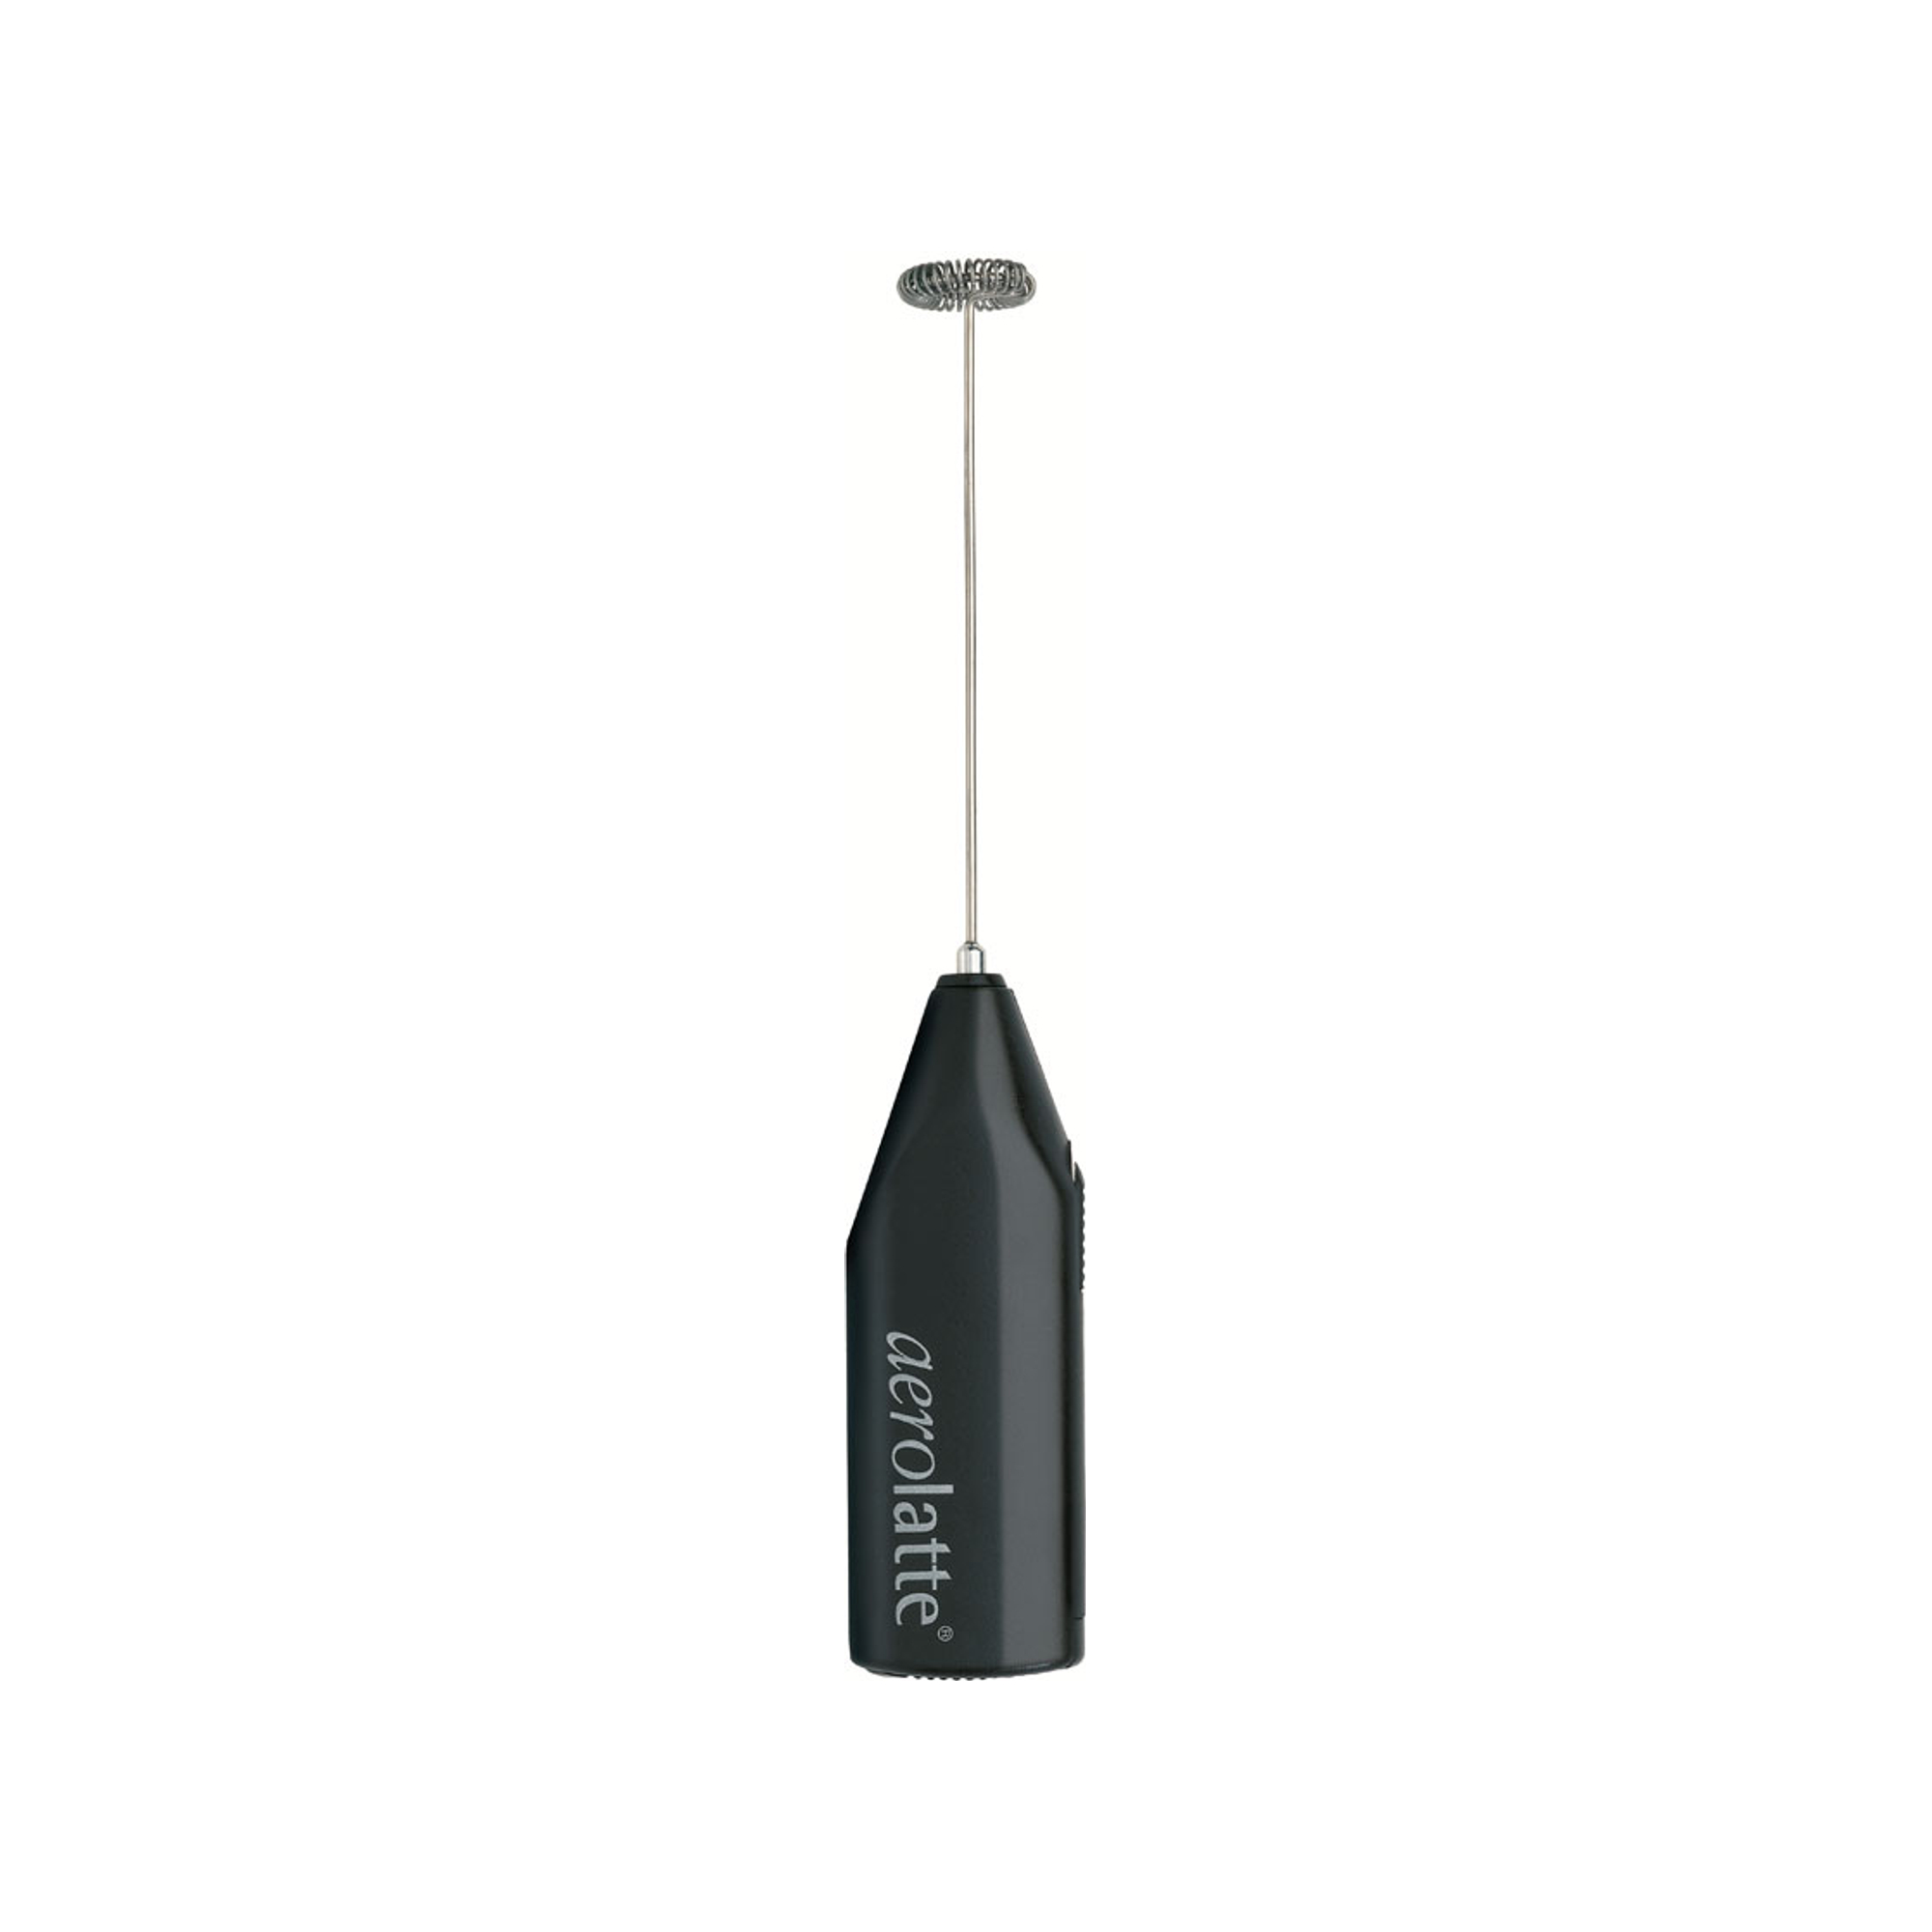 Aerolatte Milk Frother, The Original Steam-Free Frother, Satin Finish